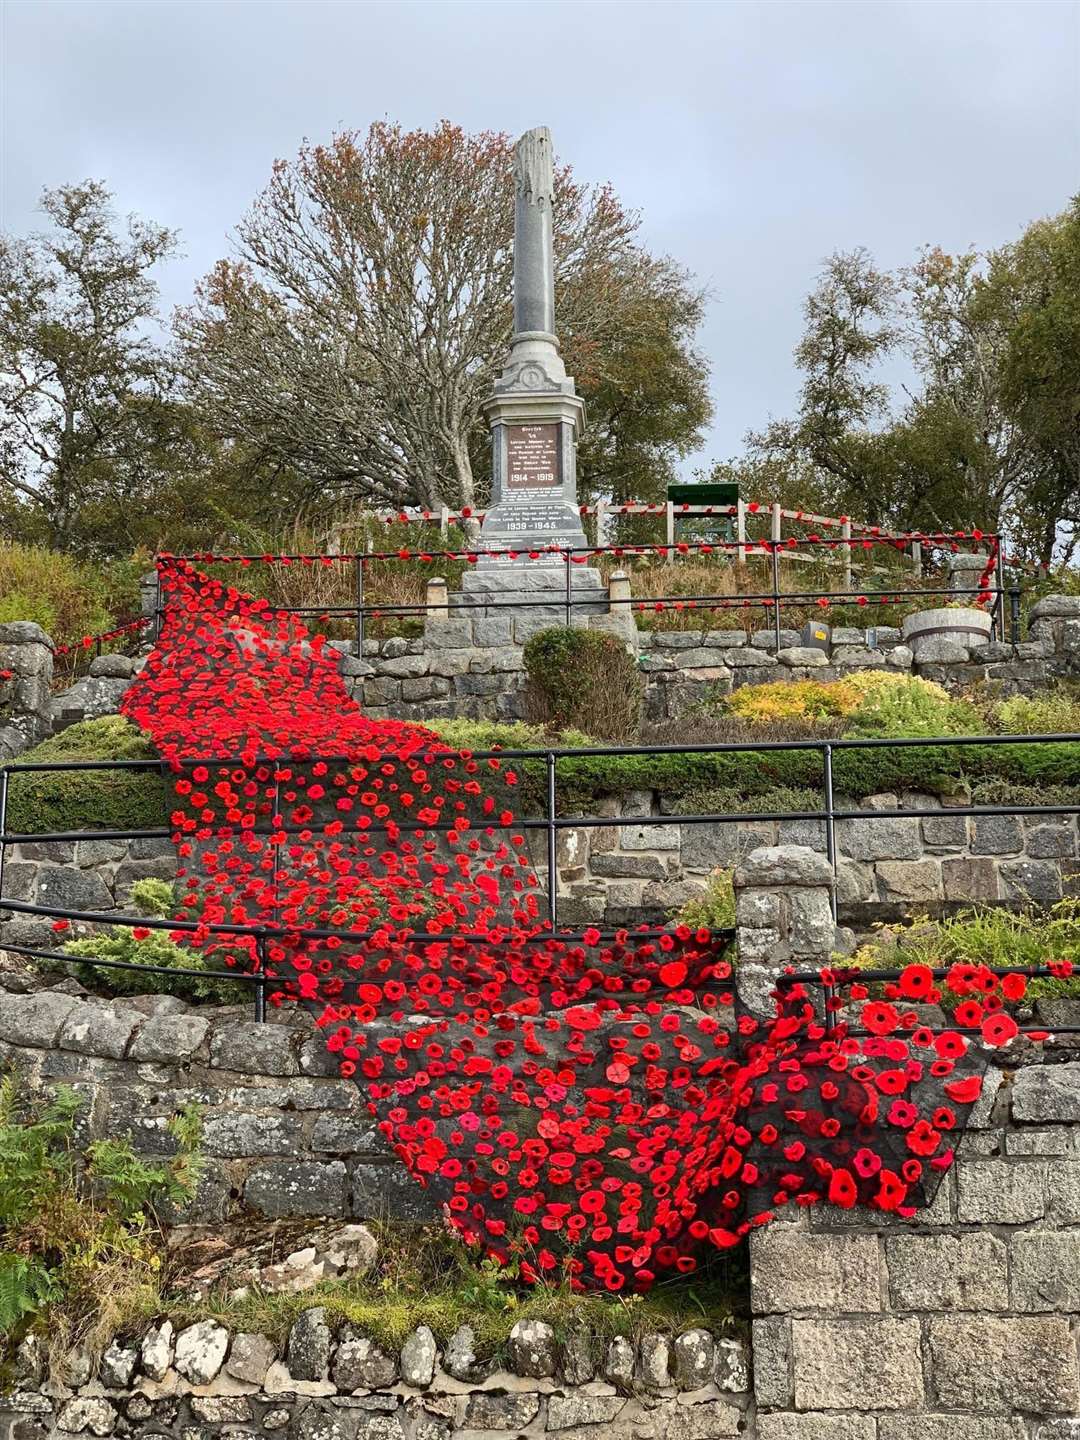 The cascade of poppies made a stunning display. Picture: Tracie Drummond